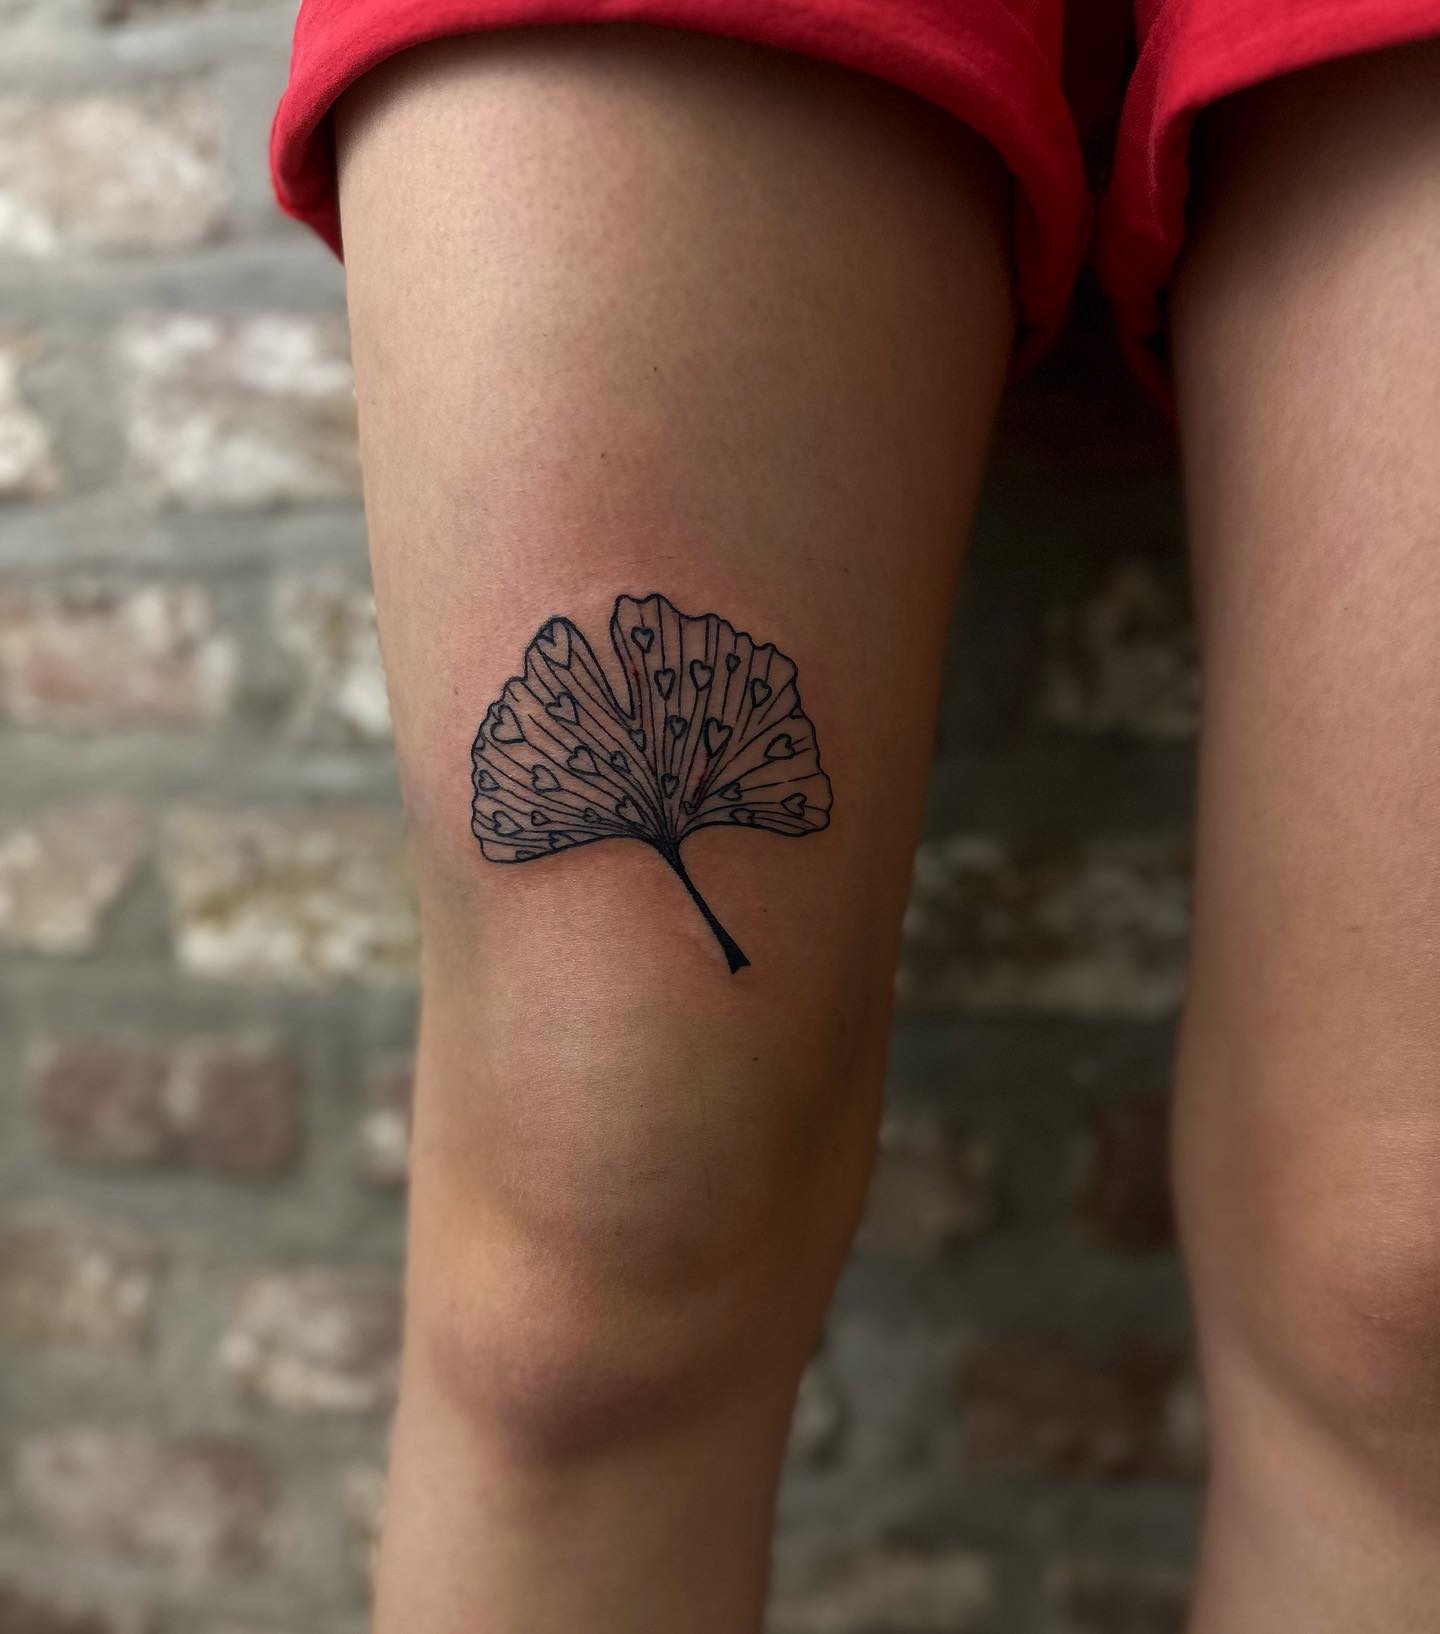 Gingko 
Thank you so much for the trust 

#tattoo #tattooideas #tattooinspiratio